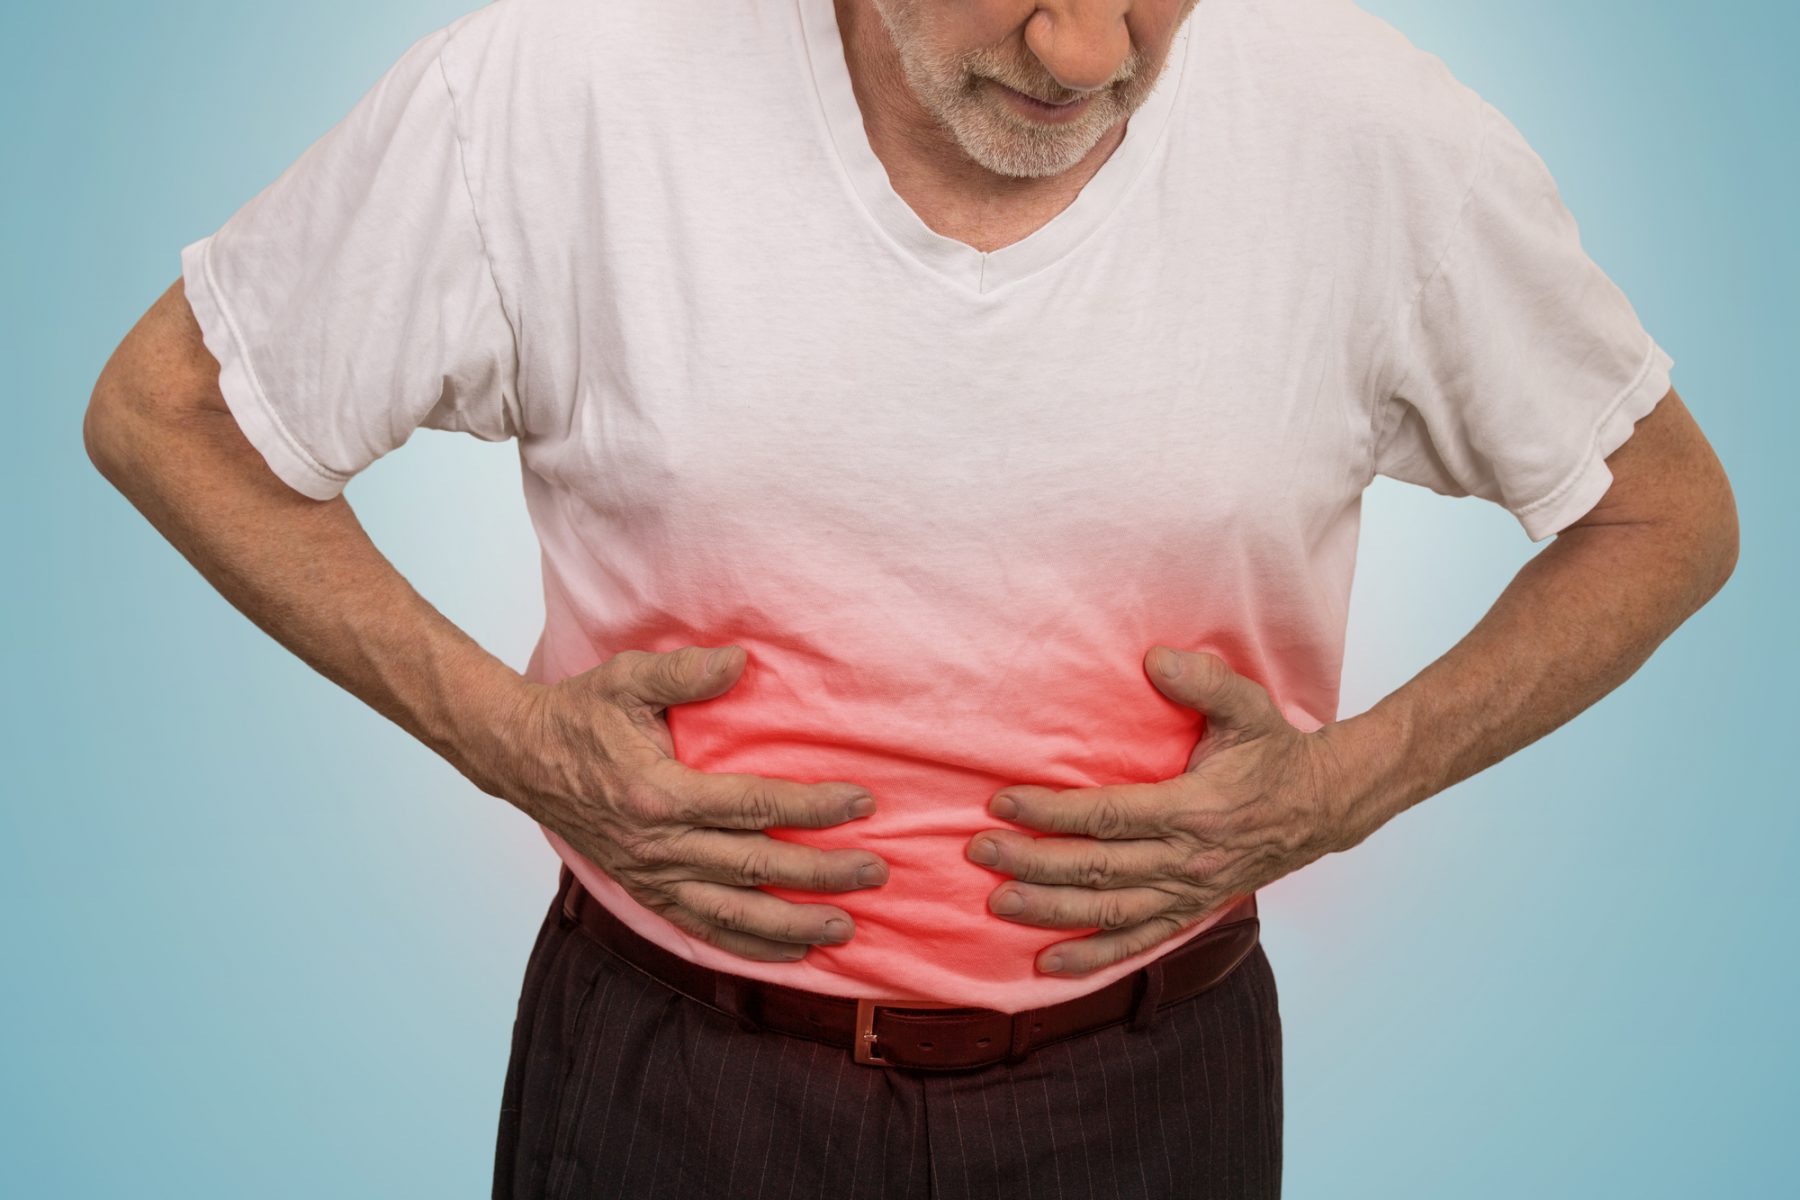 Man suffering from gut inflammation clutching his belly with redness showing